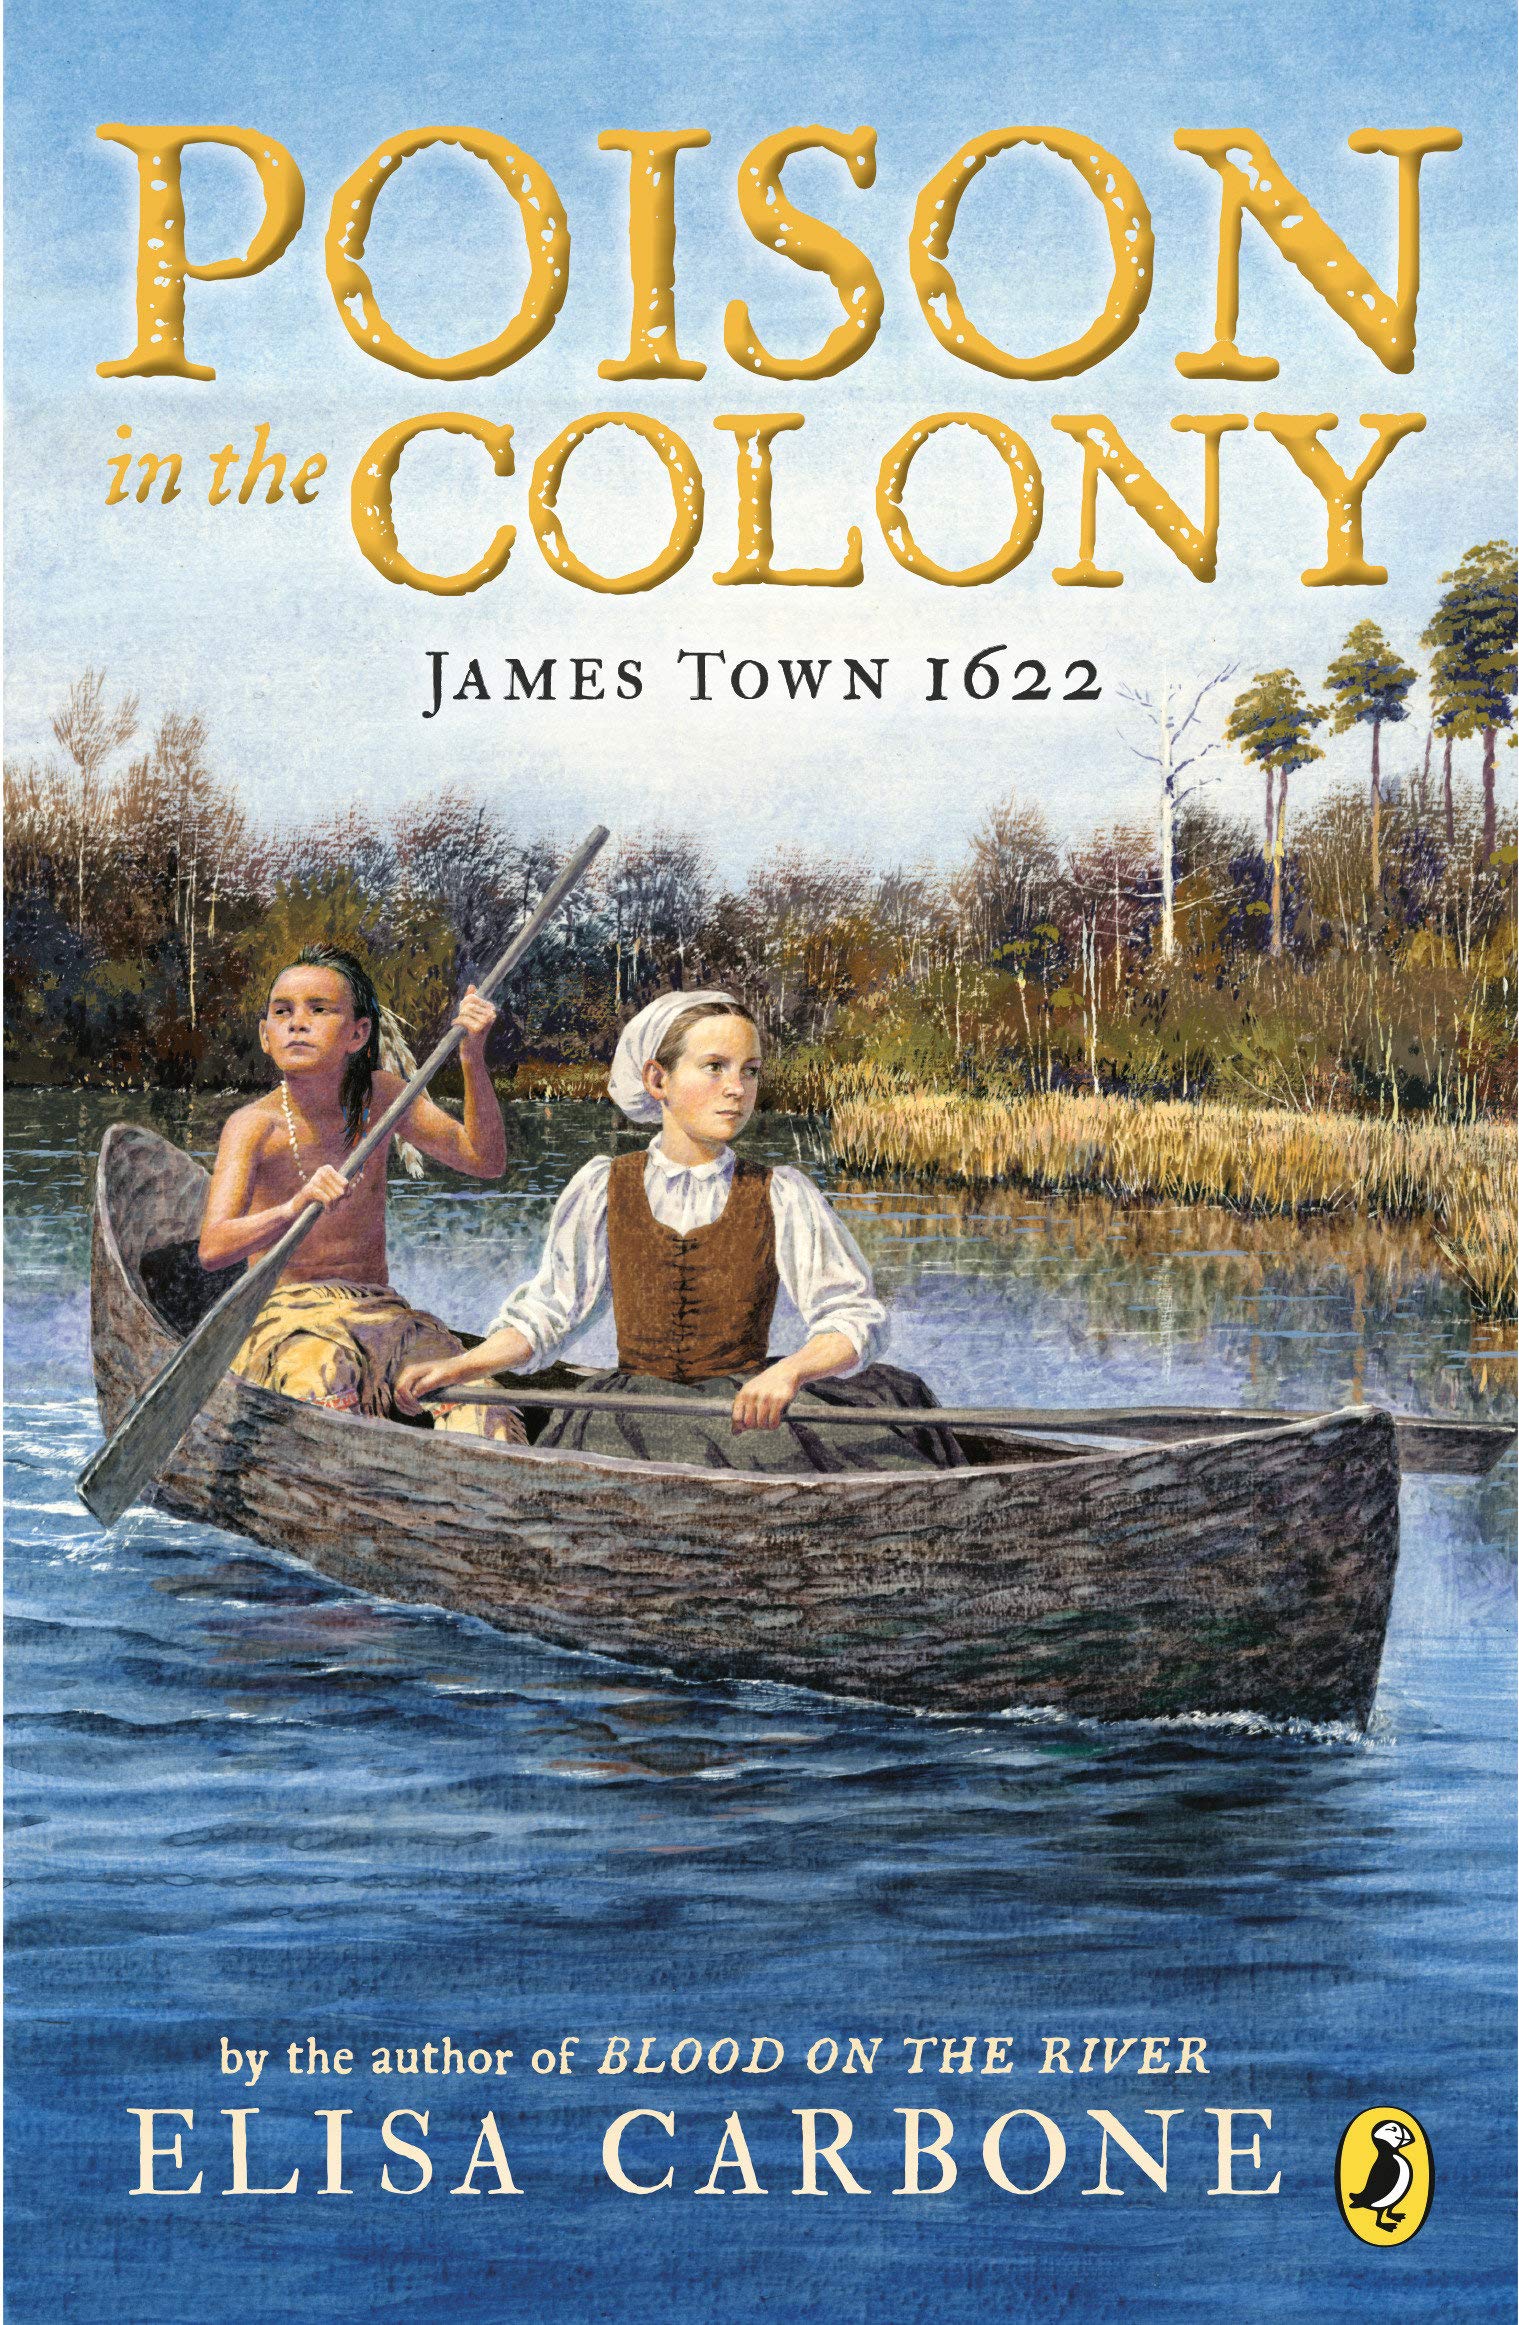 Poison in the Colony: James Town 1622